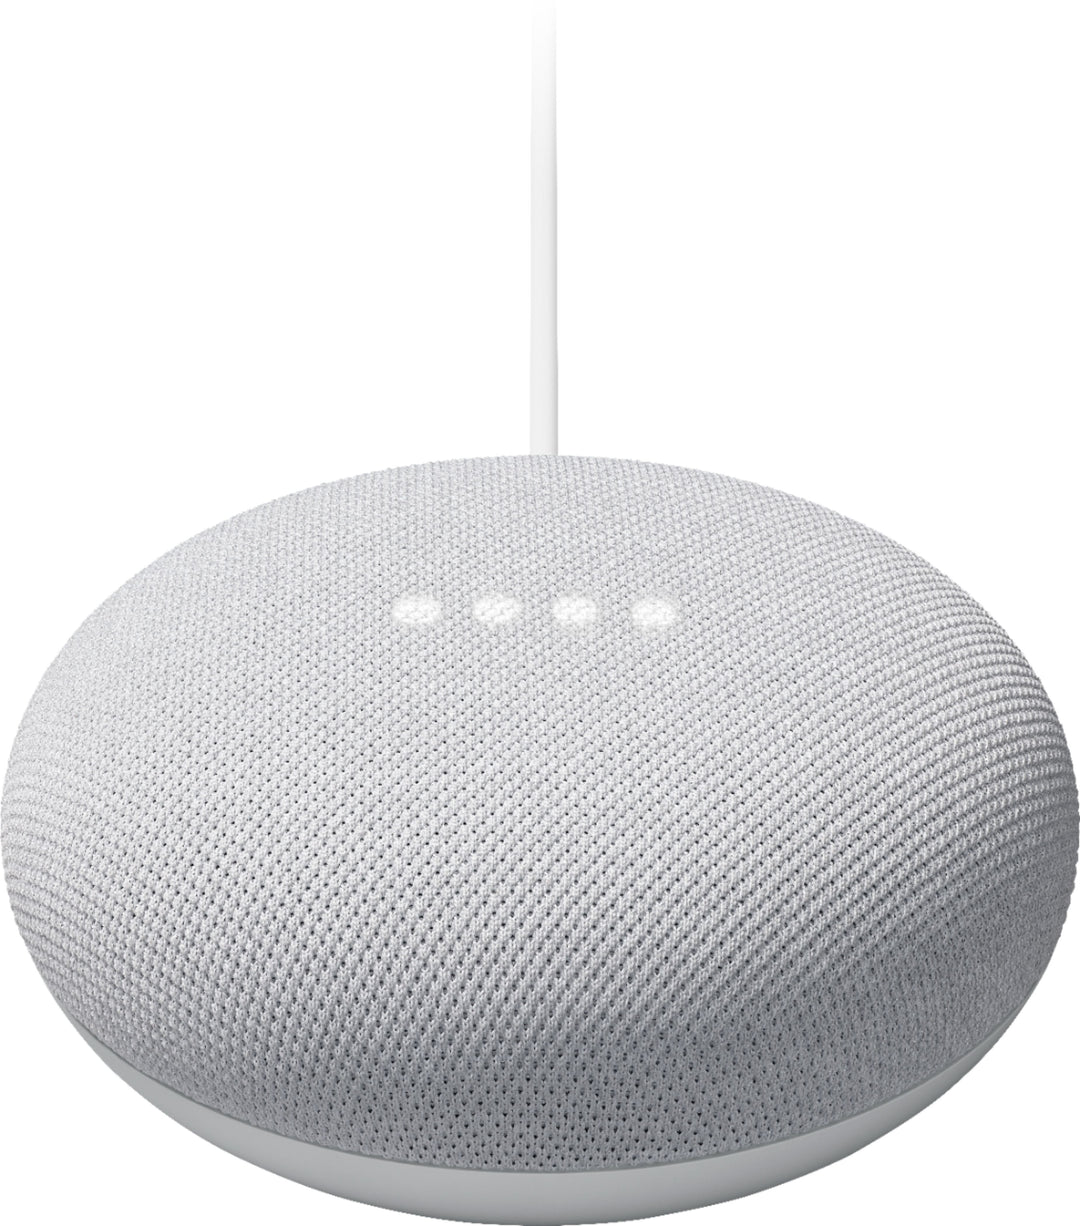 Nest Mini (2nd Generation) with Google Assistant - Chalk_4